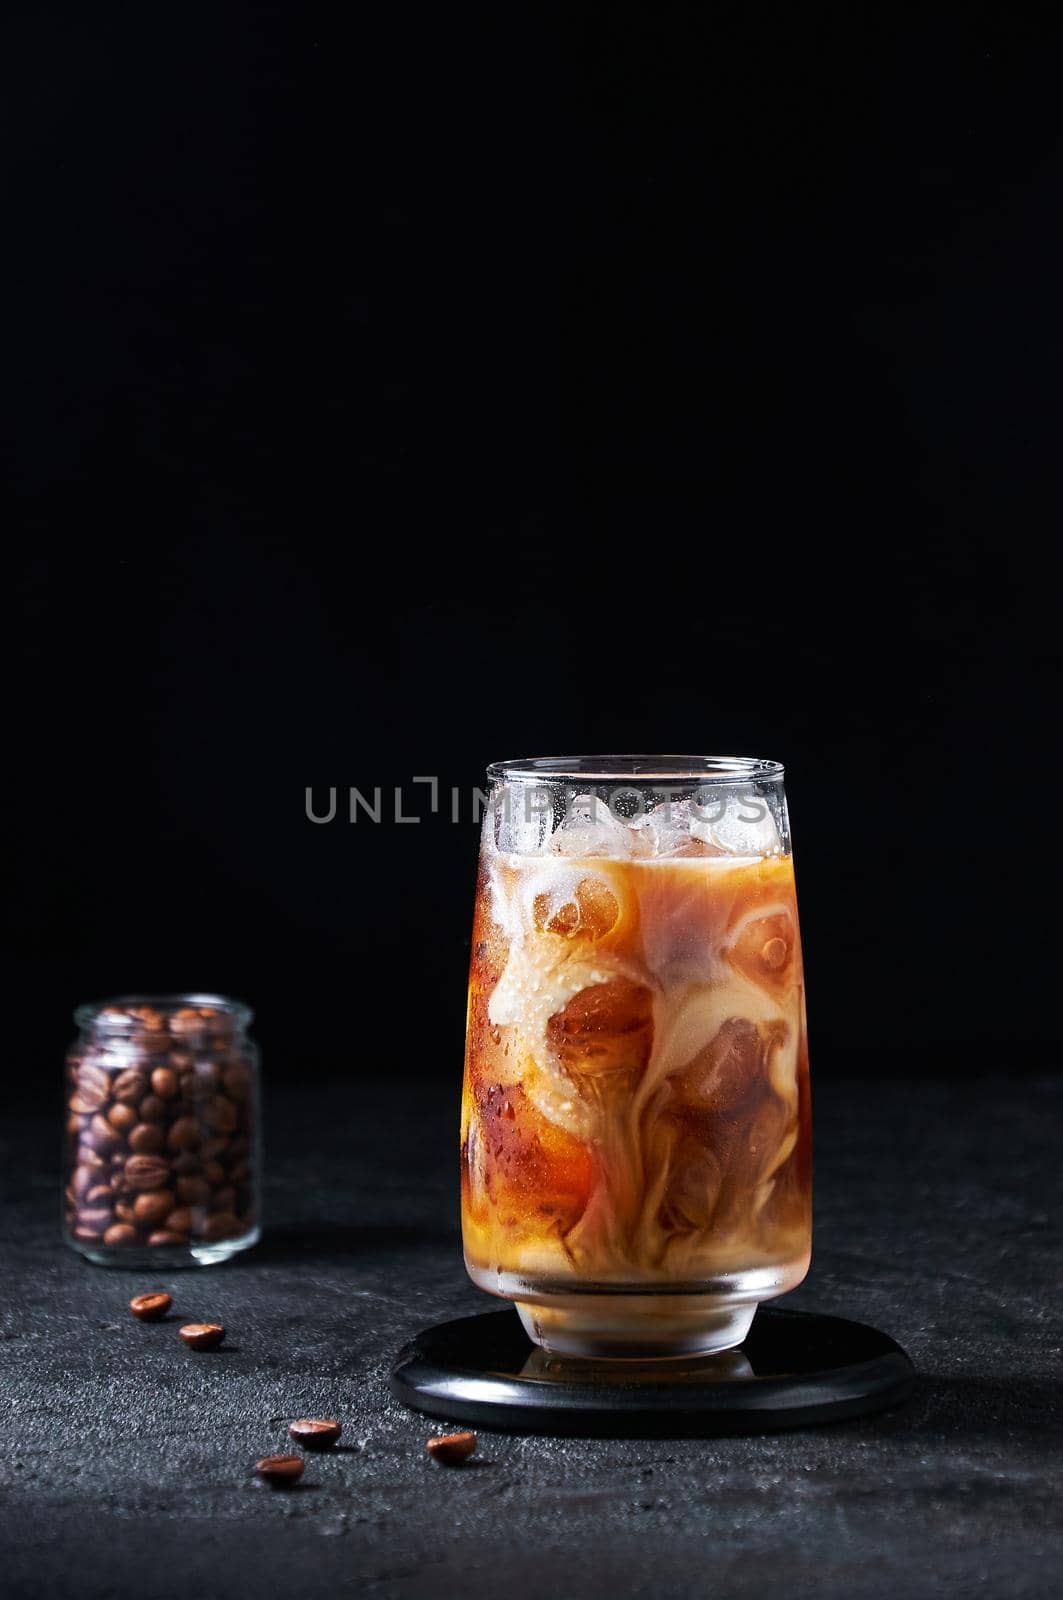 Iced Coffee with Milk in Tall Glass on Dark Background. Concept Refreshing Summer Drink.